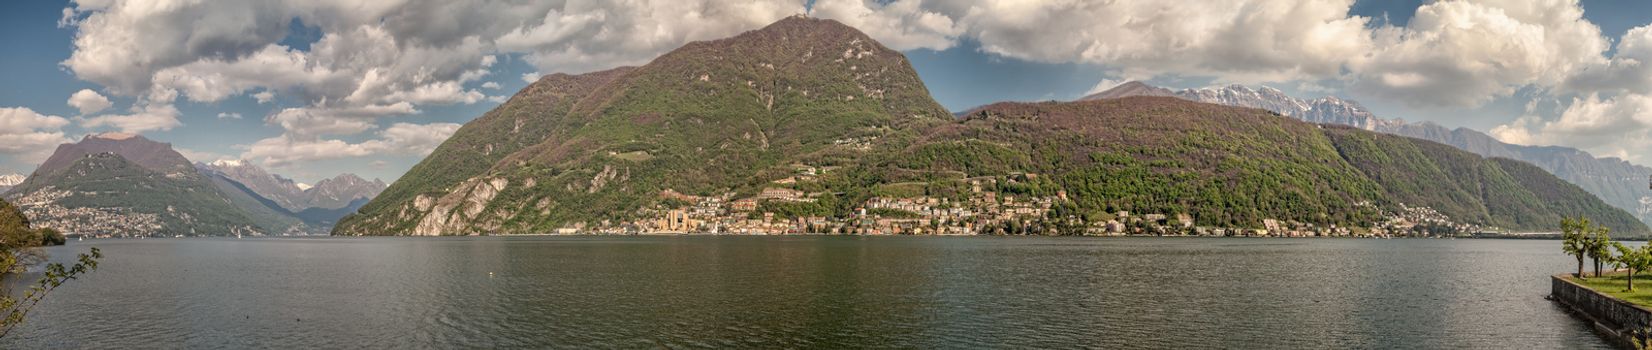 Lugano  is a city in southern Switzerland, in the Italian-speaking canton of Ticino, which borders Italy